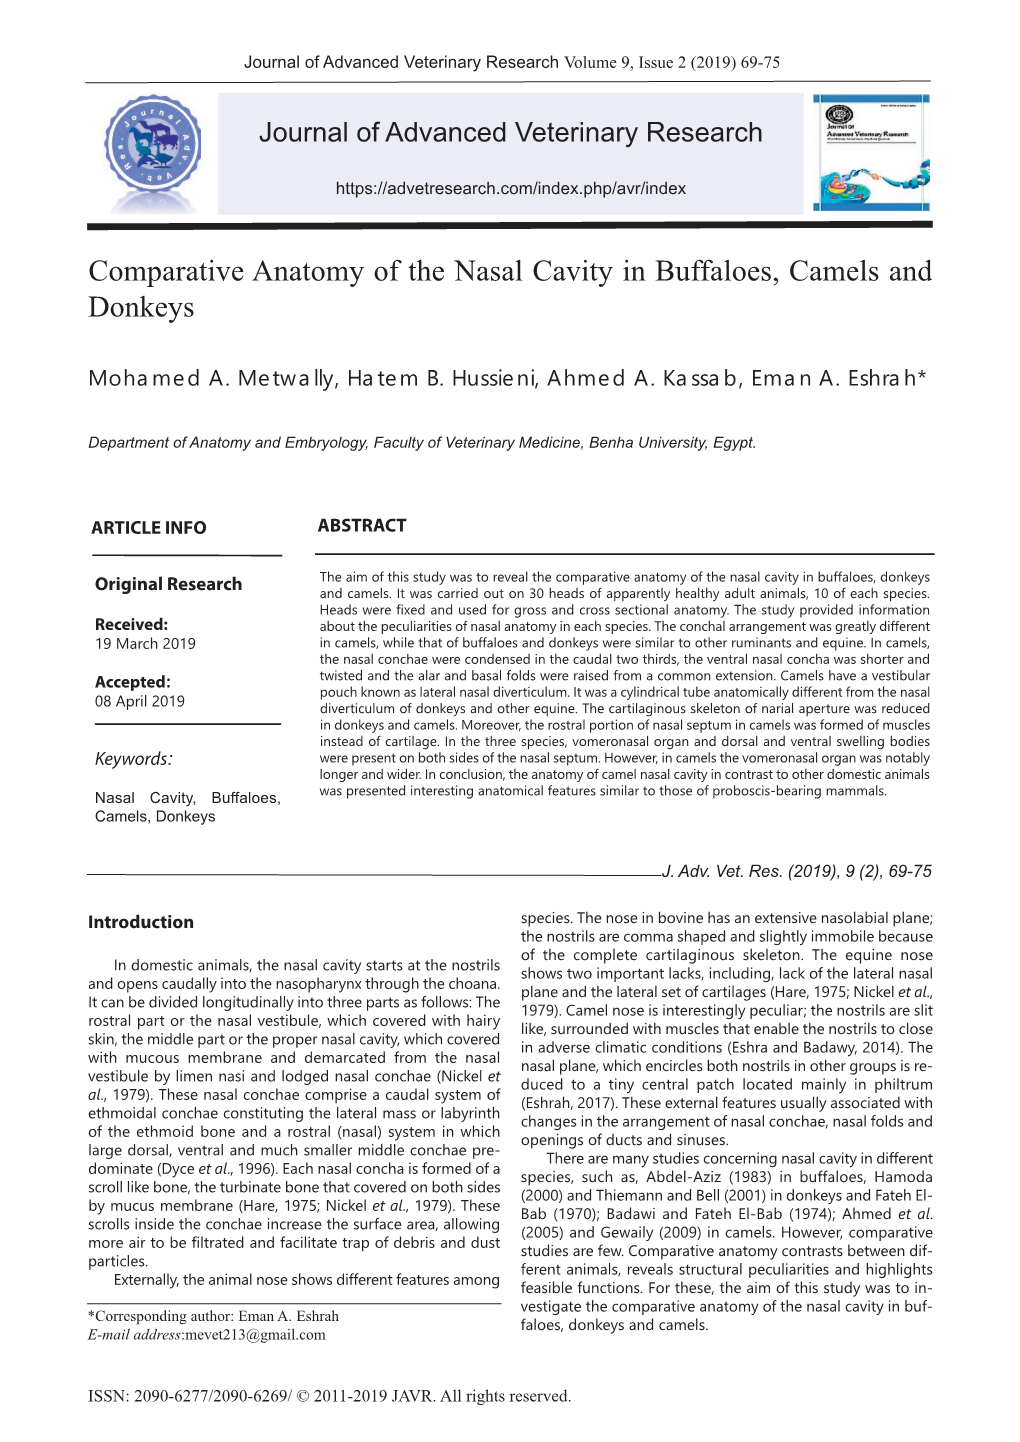 Comparative Anatomy of the Nasal Cavity in Buffaloes, Camels and Donkeys